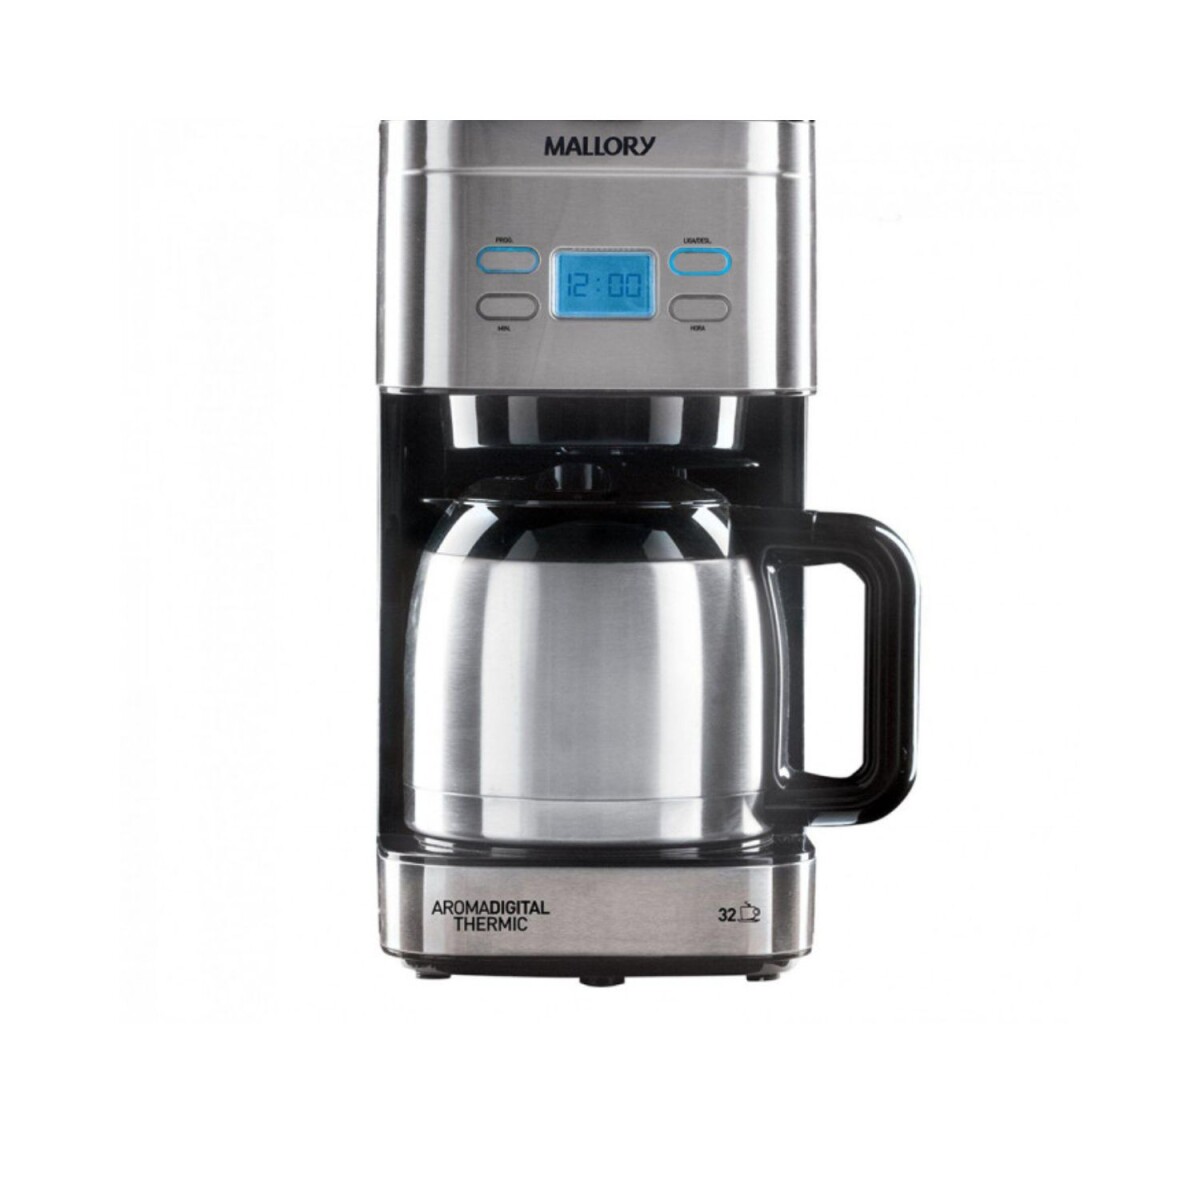 Cafetera Mallory Aroma Digital Thermic 32 Tazas 